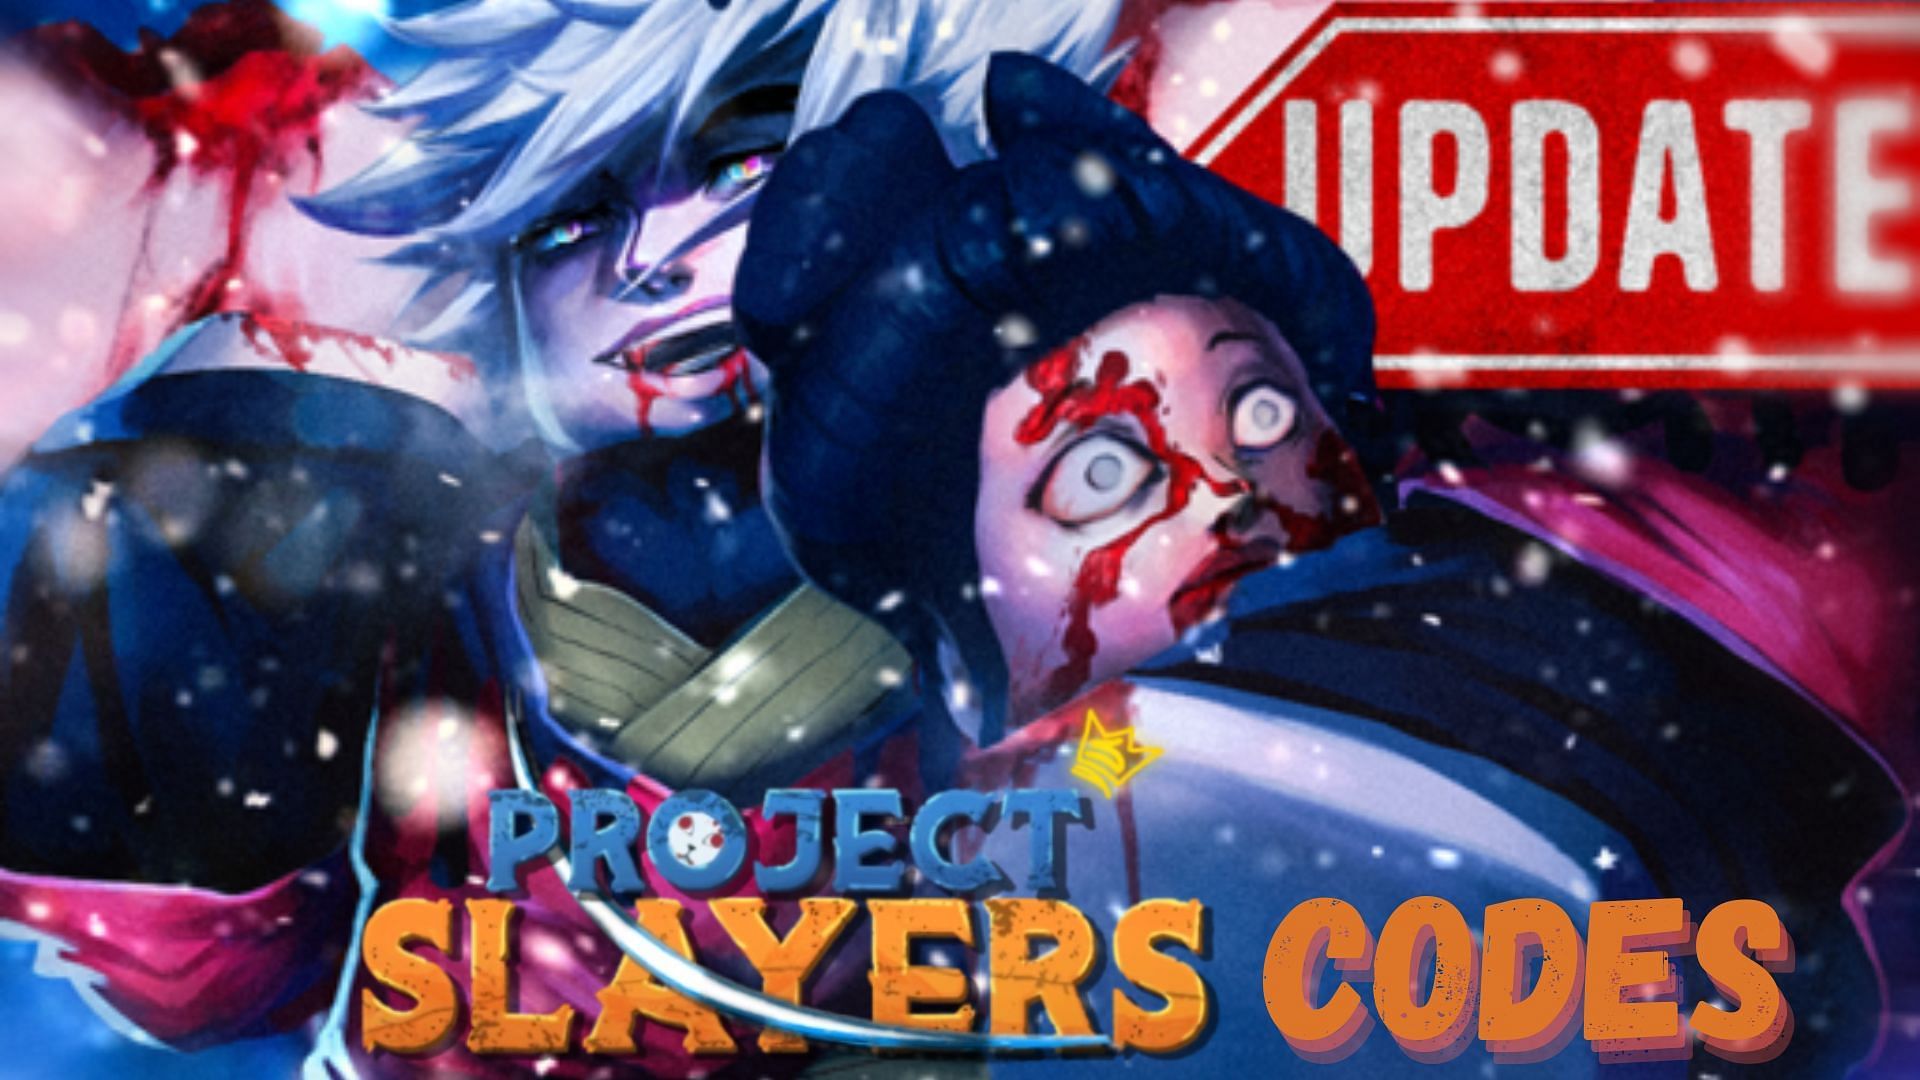 Featured image of Project Slayers codes